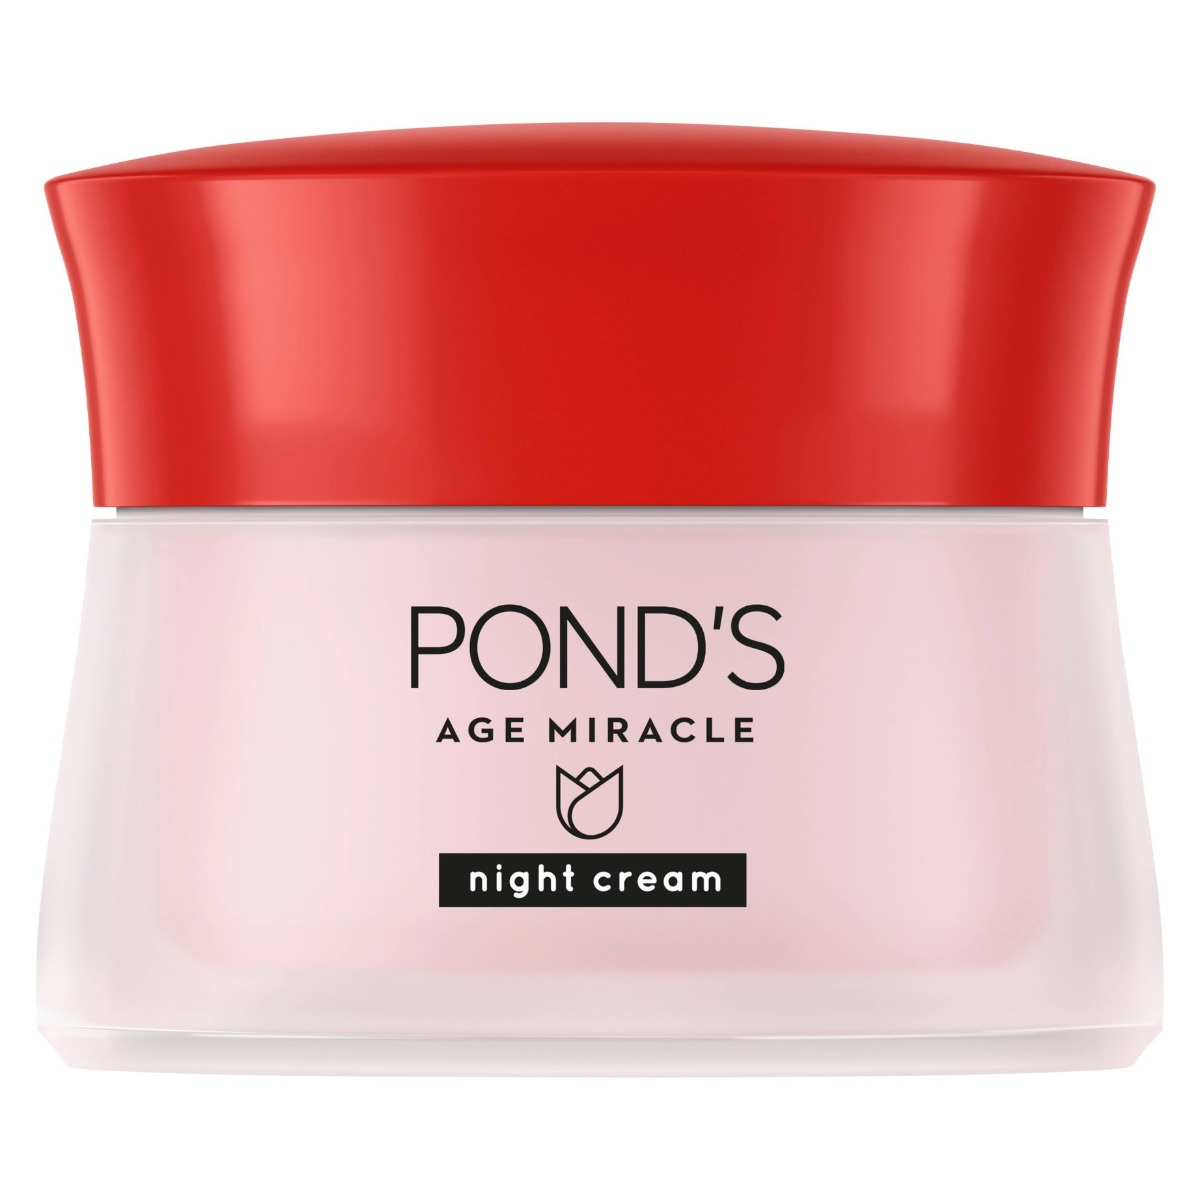 POND'S Age Miracle Anti Aging Night Cream